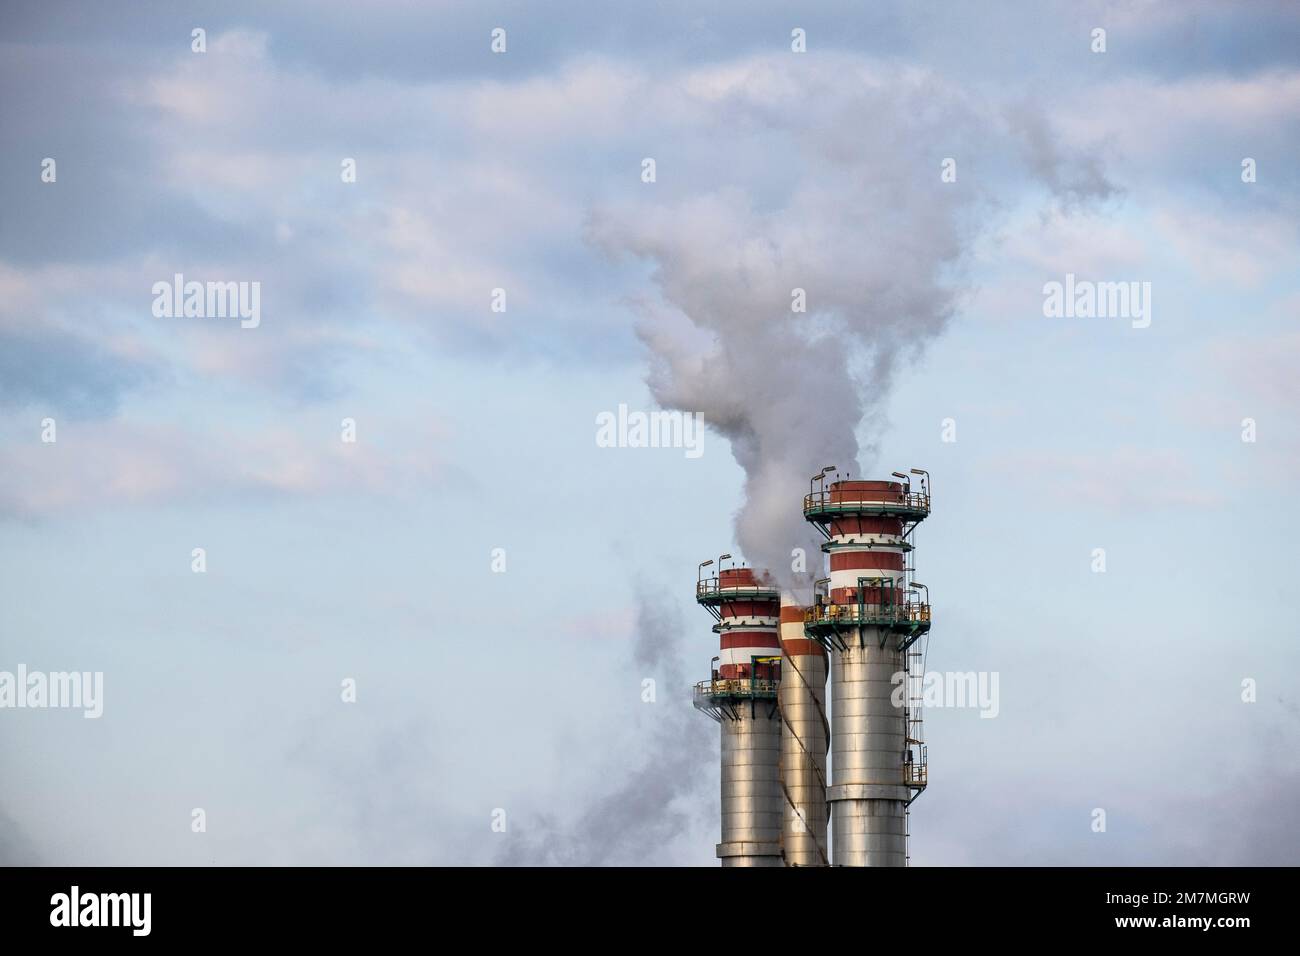 Smokestack exhaling smoke in a refinery with the sky in the background Stock Photo